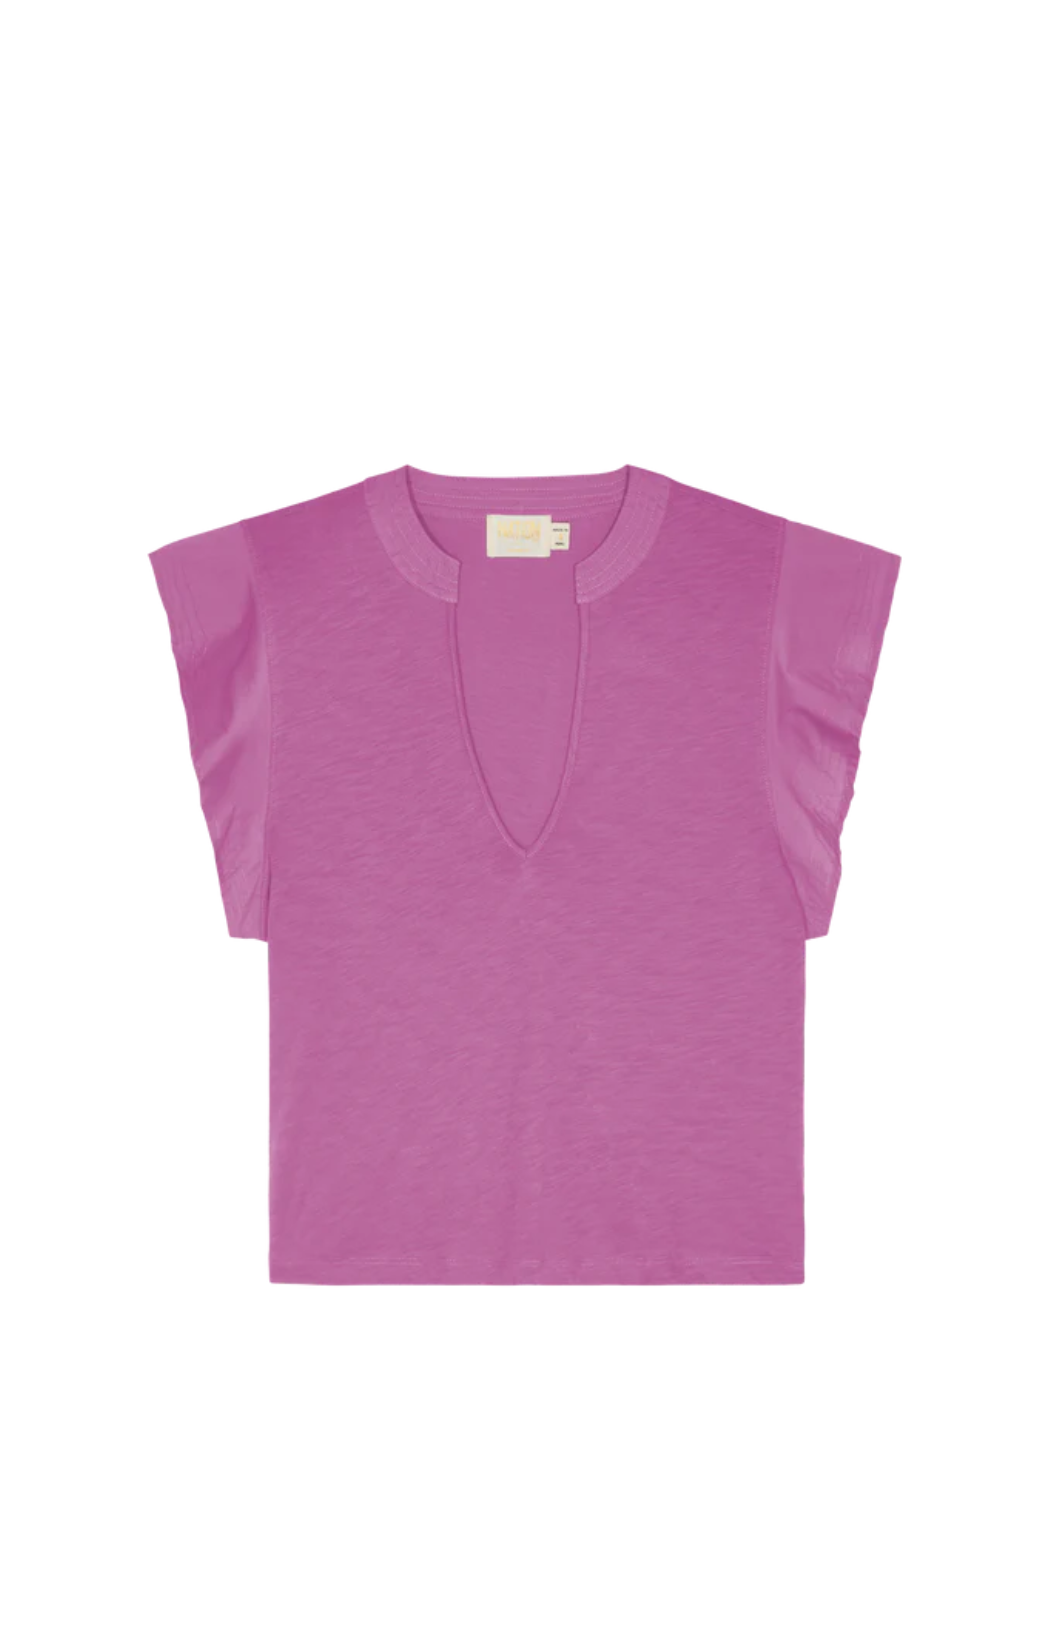  Pink Purple Ruffle sleeve v-neck tee by Nation ltd Constance v-neck top